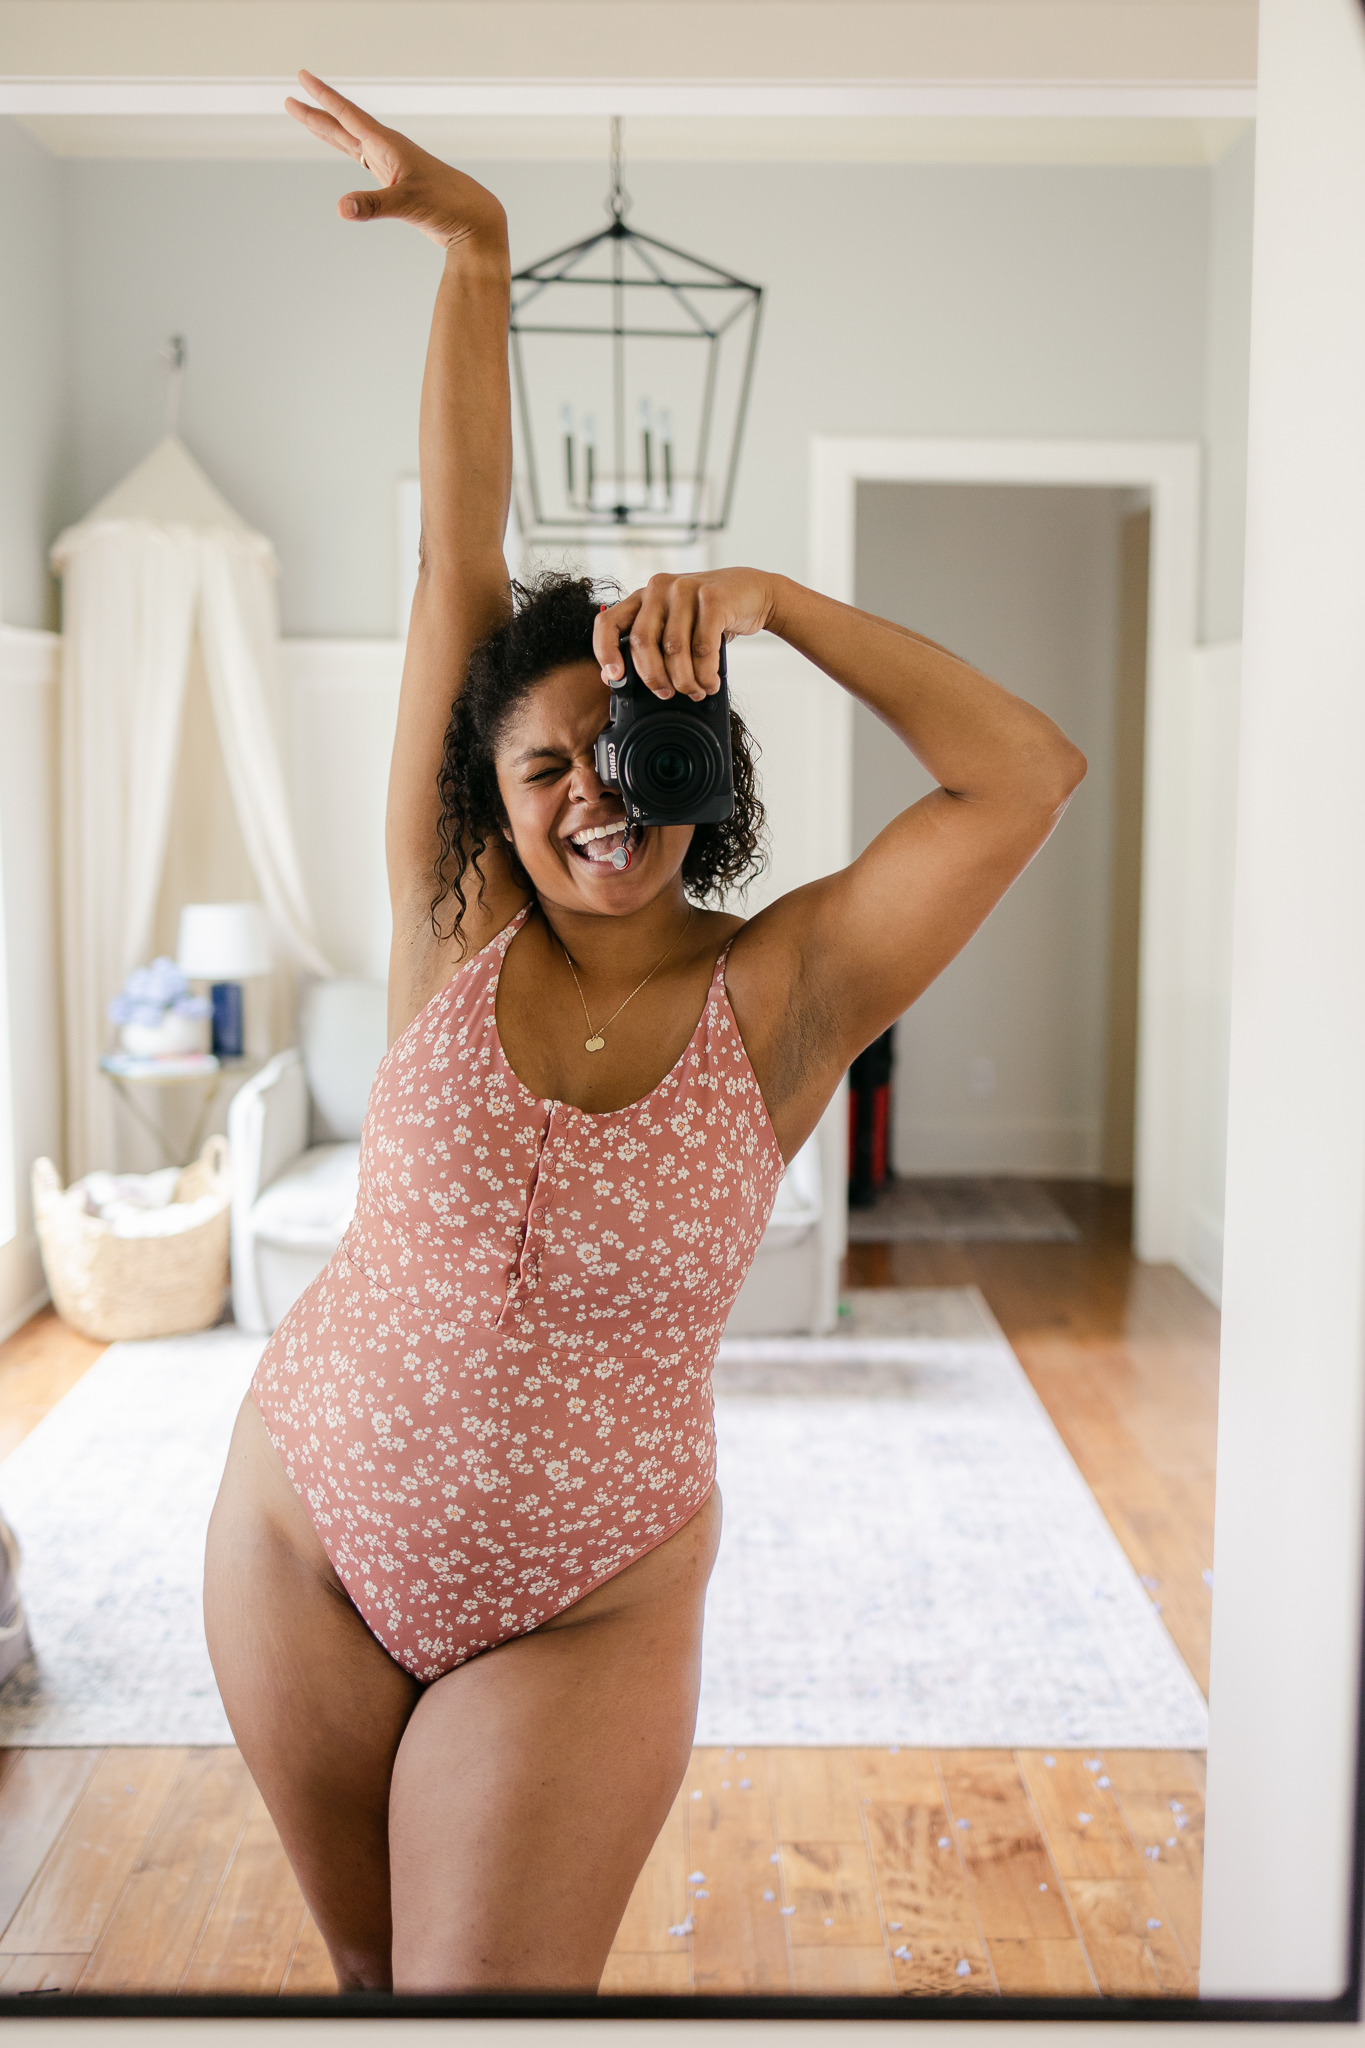 Black woman looking excited taking a self portrait in a mirror of pink and white floral one piece swimsuit